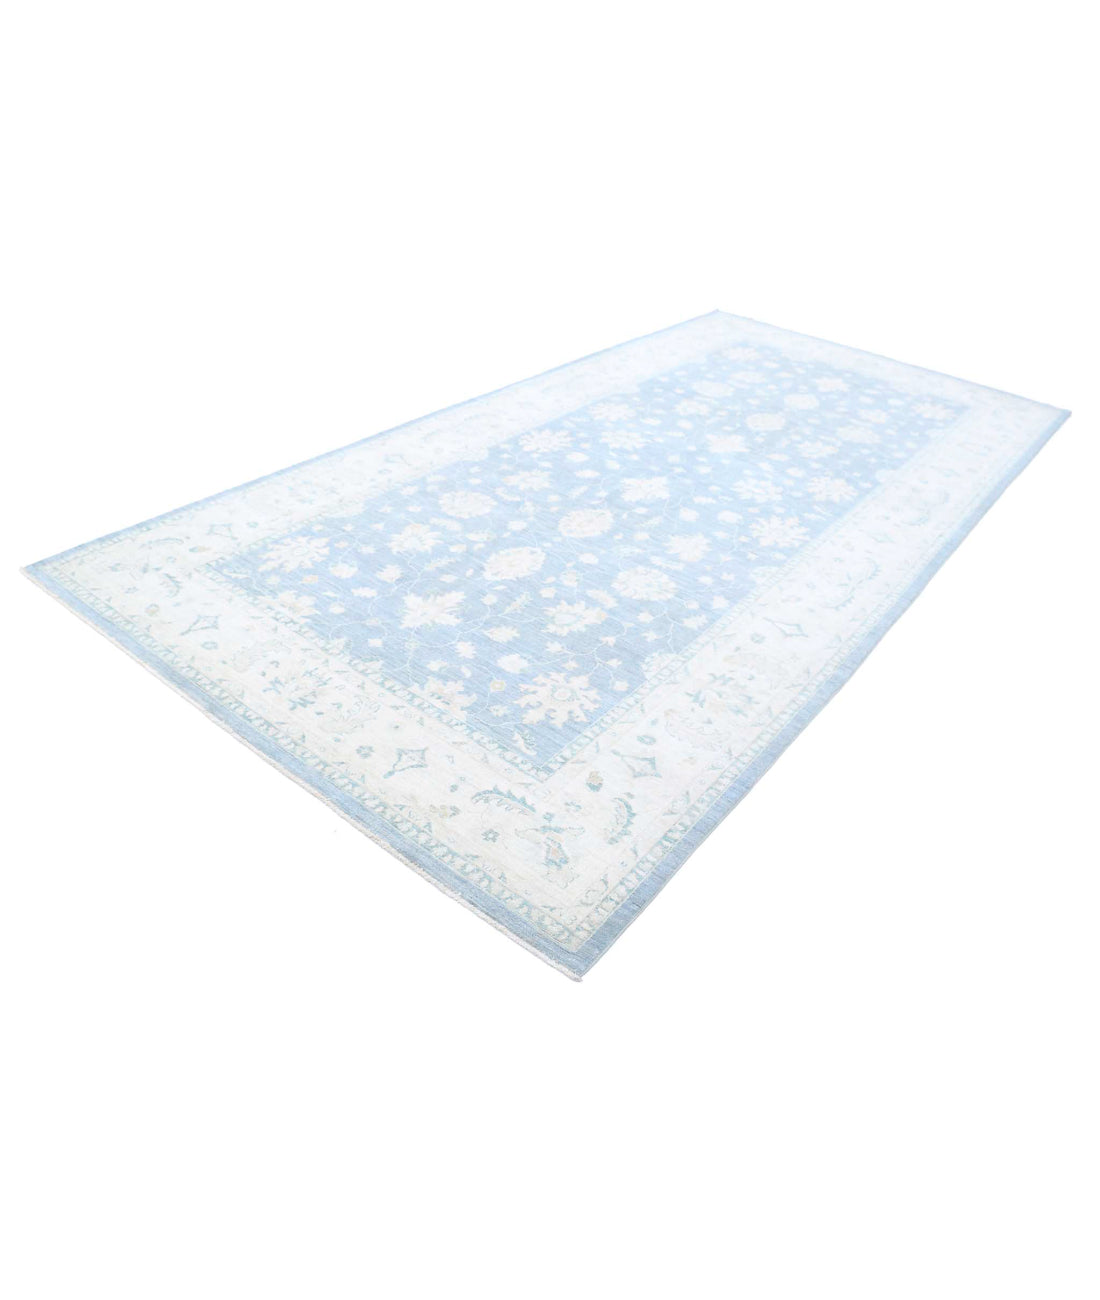 Serenity 6'6'' X 13'1'' Hand-Knotted Wool Rug 6'6'' x 13'1'' (195 X 393) / Blue / Ivory